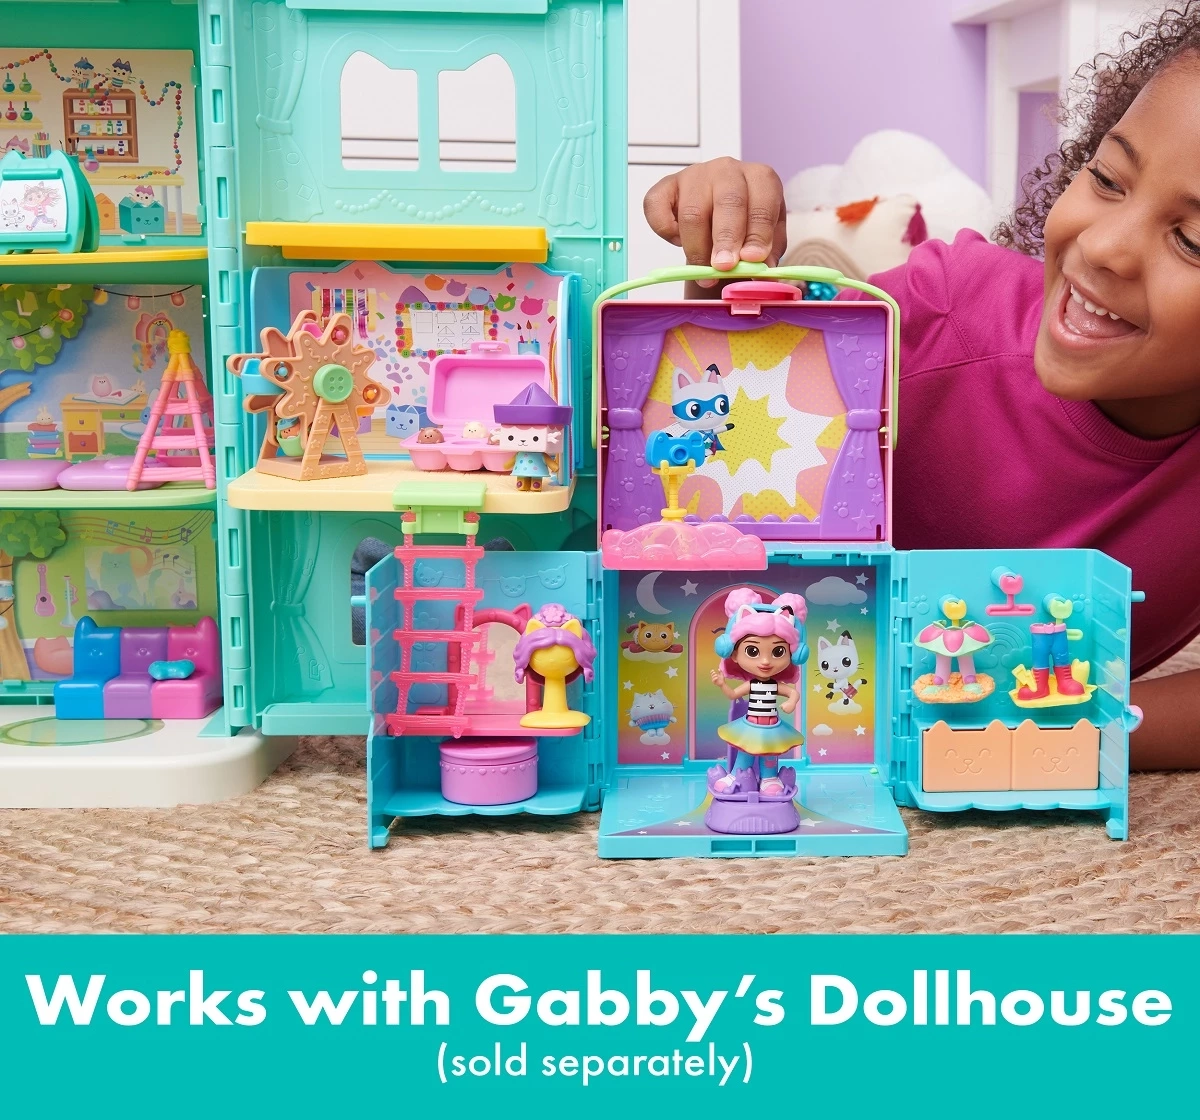 Gabbys Dollhouse, Dress-Up Closet Portable Playset with a Gabby Doll, Surprise Toys and Photo Shoot Accessories, Kids Toys for Ages 3 and up